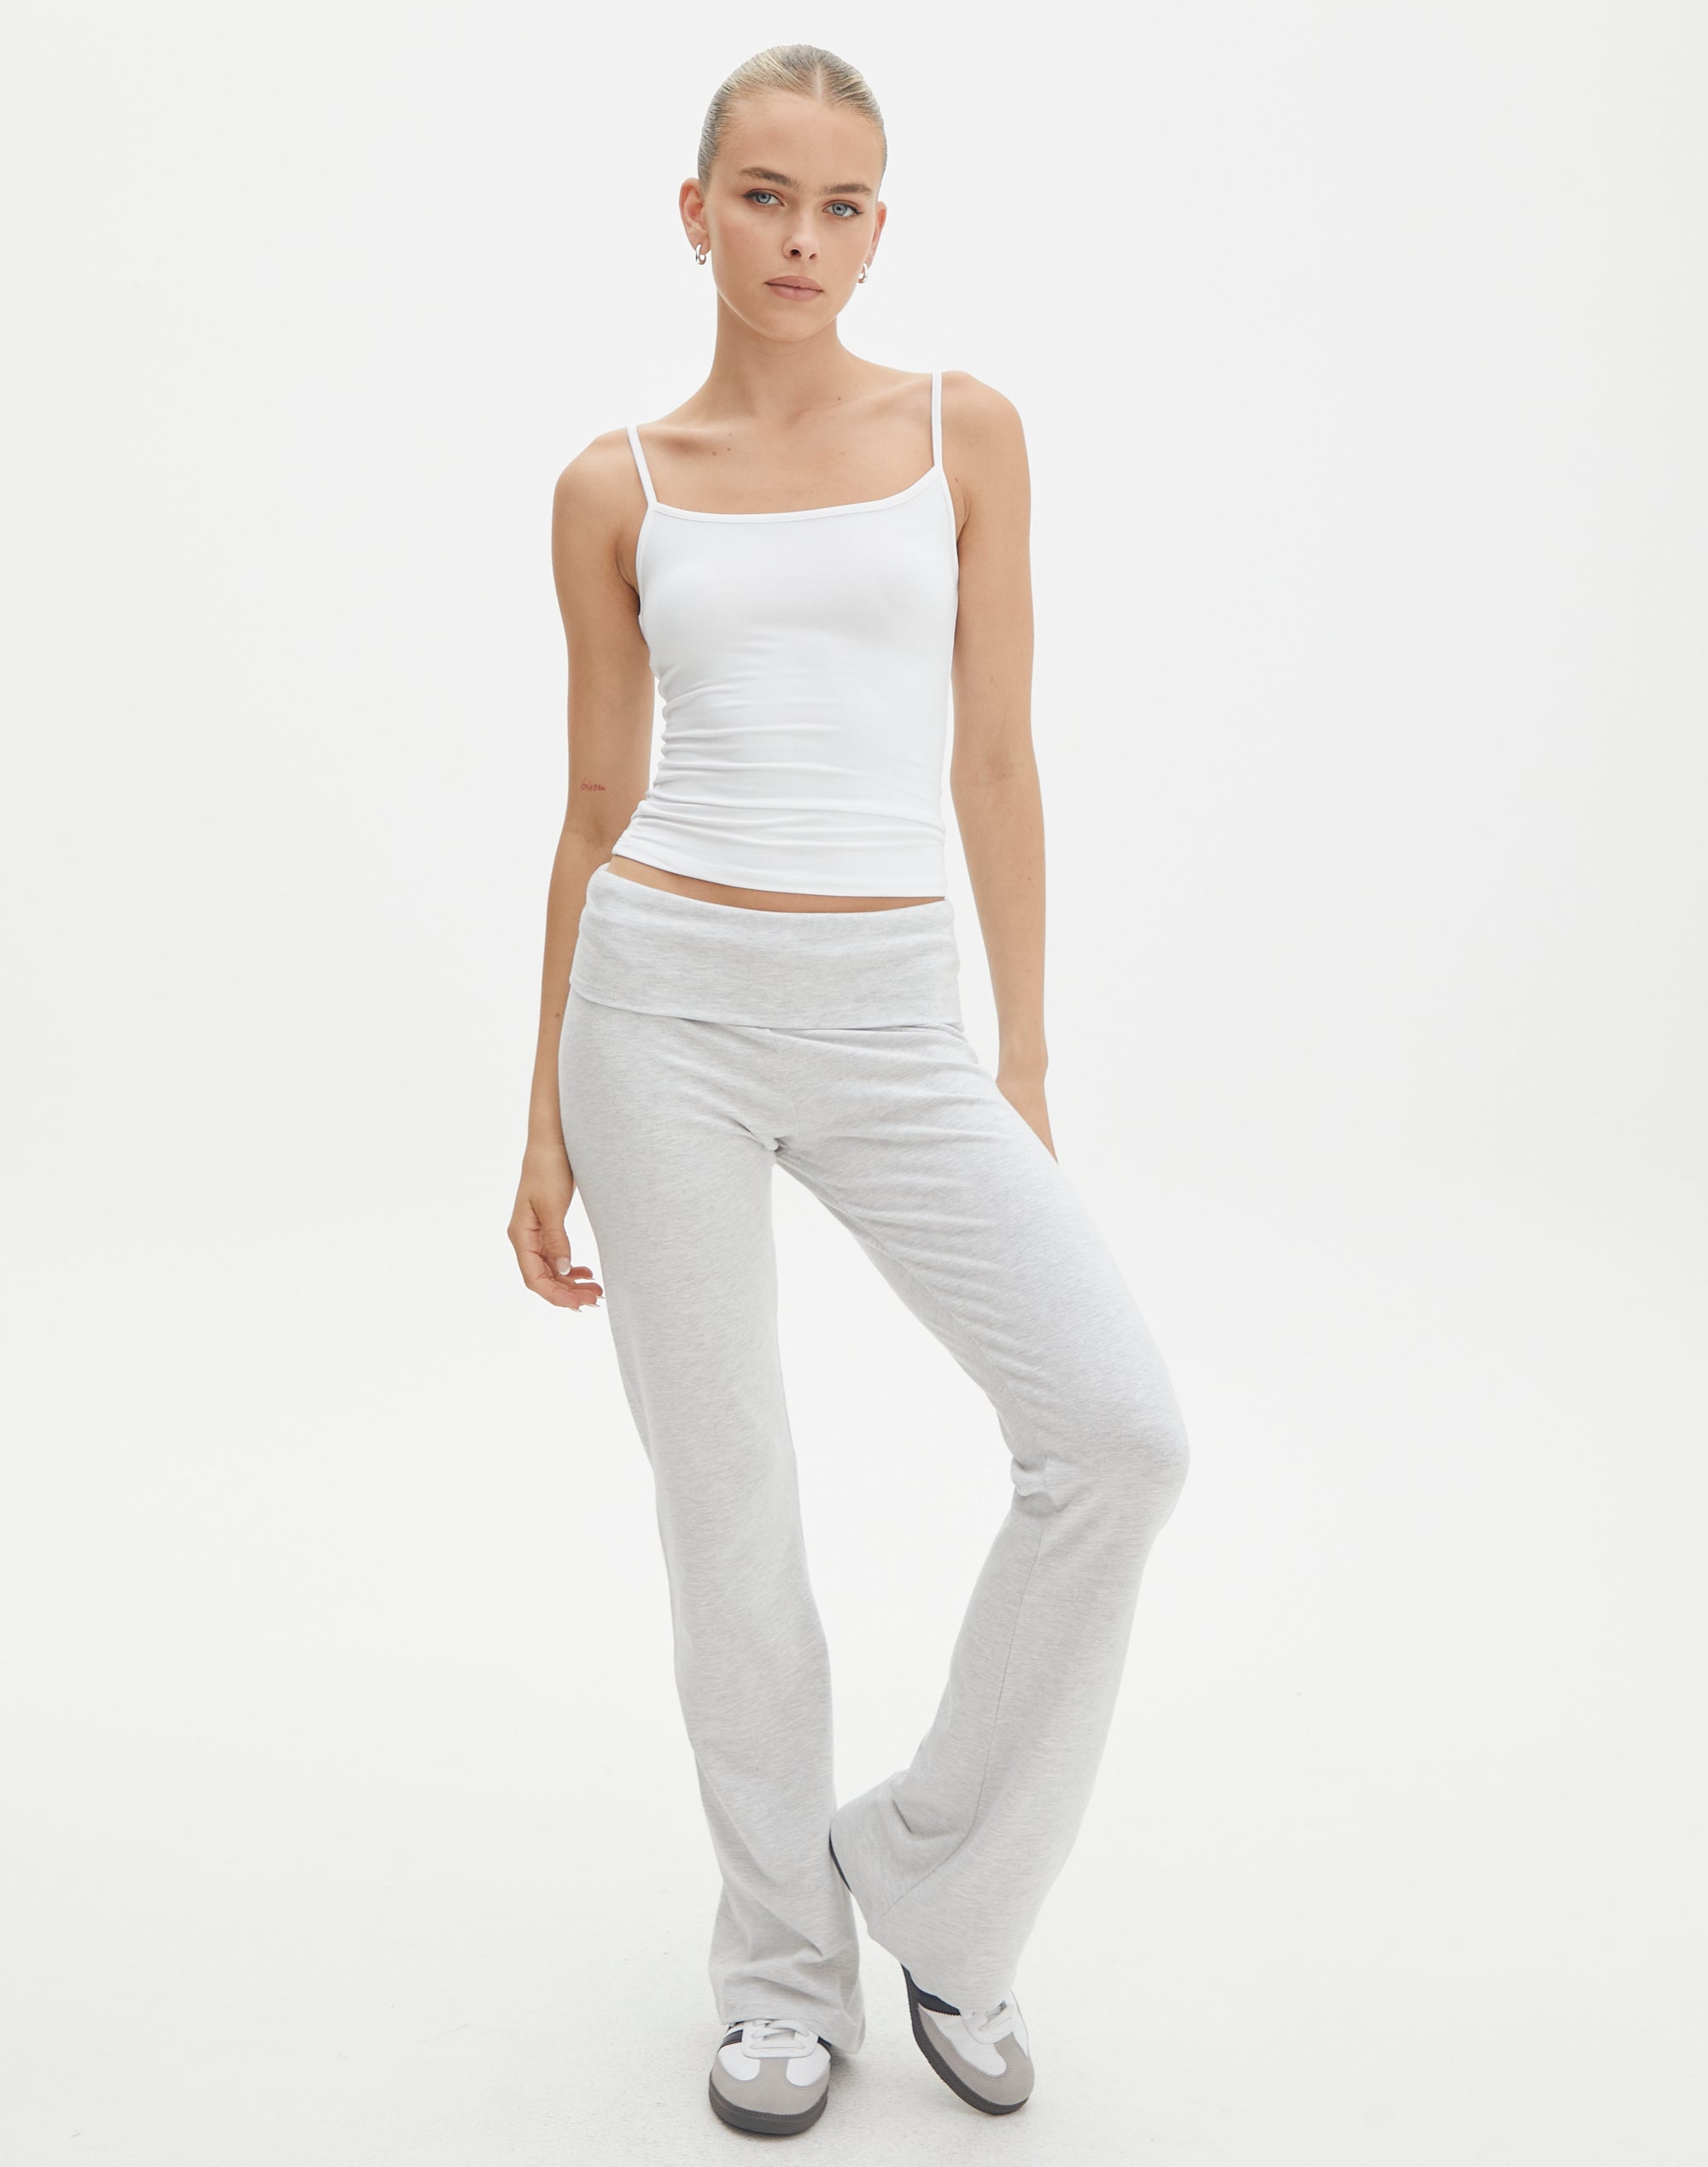 Cotton Foldover Flare Pant in Snow Marle